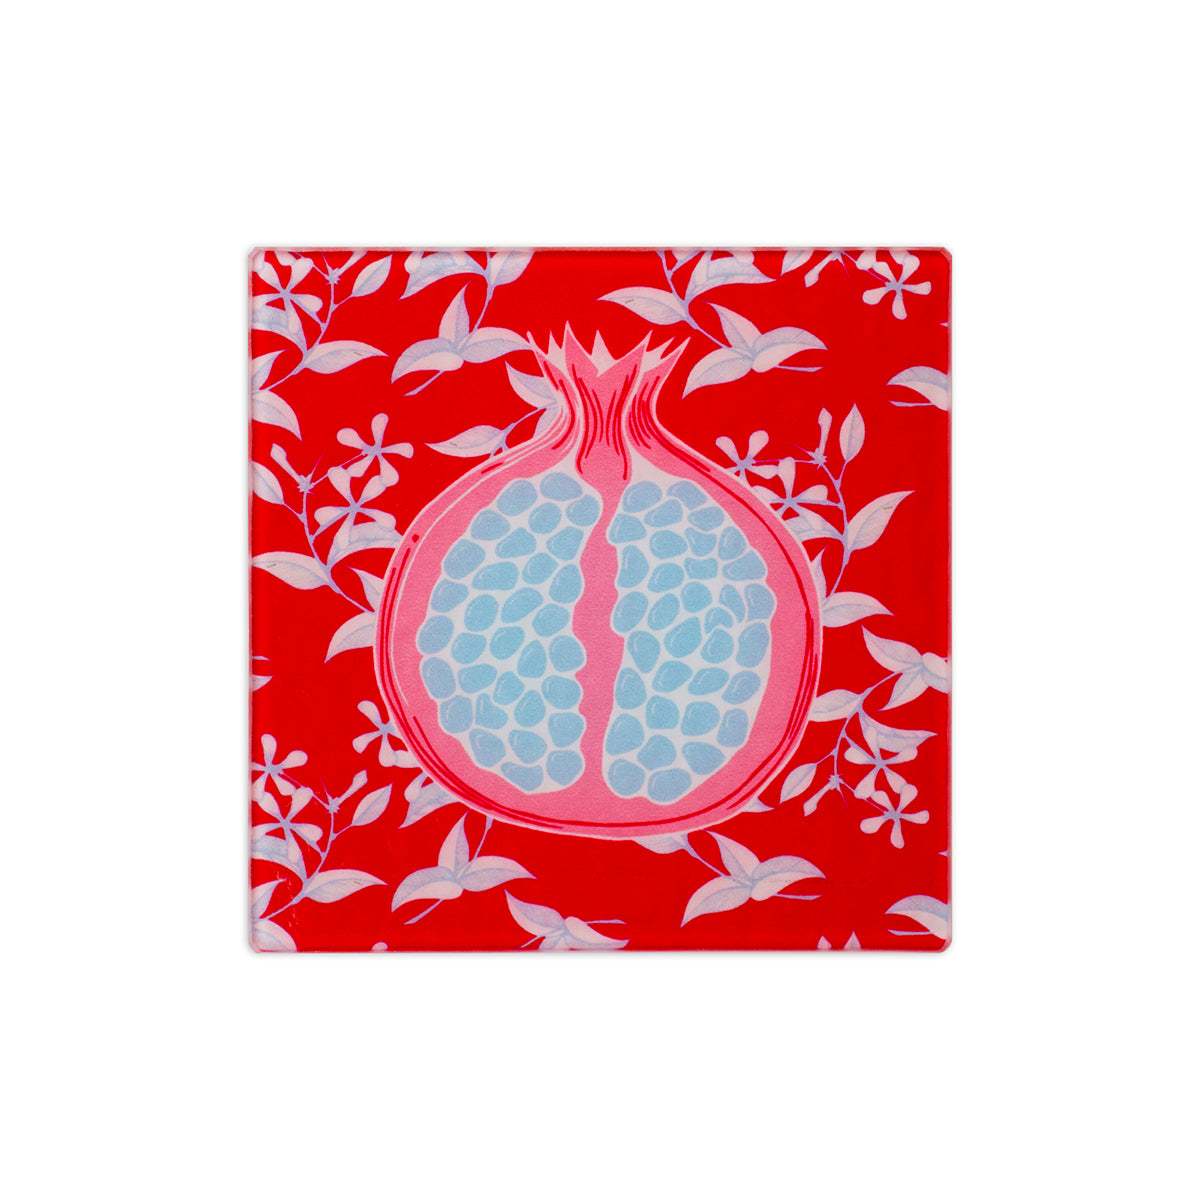 6" x 6" heat resistant tempered glass red trivet with red pomegranate illustration in the middle